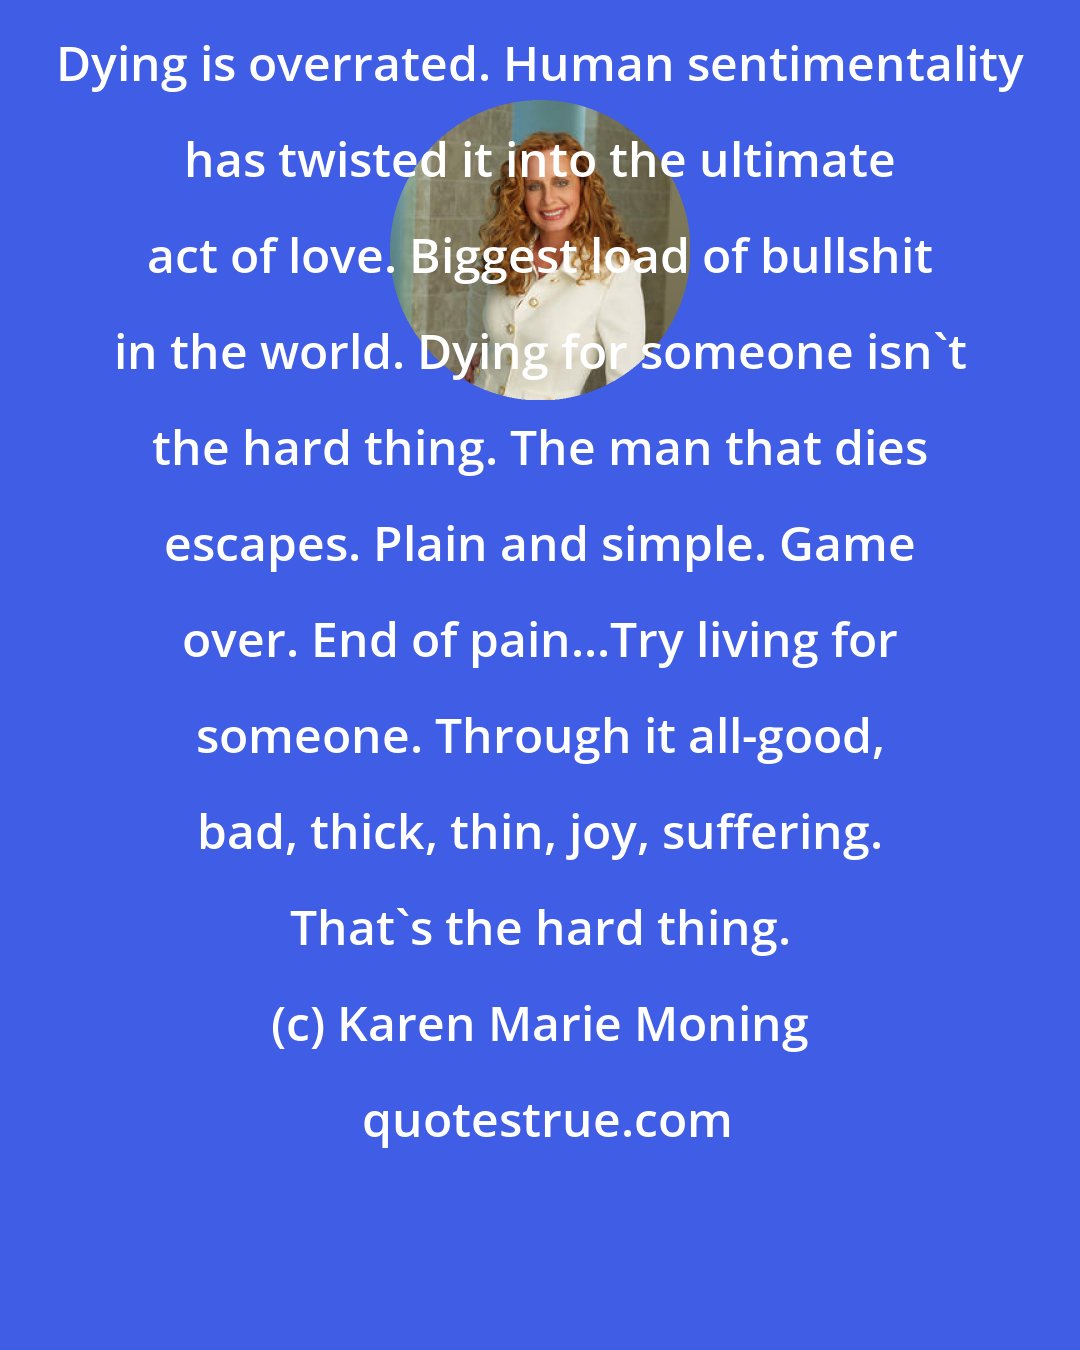 Karen Marie Moning: Dying is overrated. Human sentimentality has twisted it into the ultimate act of love. Biggest load of bullshit in the world. Dying for someone isn't the hard thing. The man that dies escapes. Plain and simple. Game over. End of pain...Try living for someone. Through it all-good, bad, thick, thin, joy, suffering. That's the hard thing.